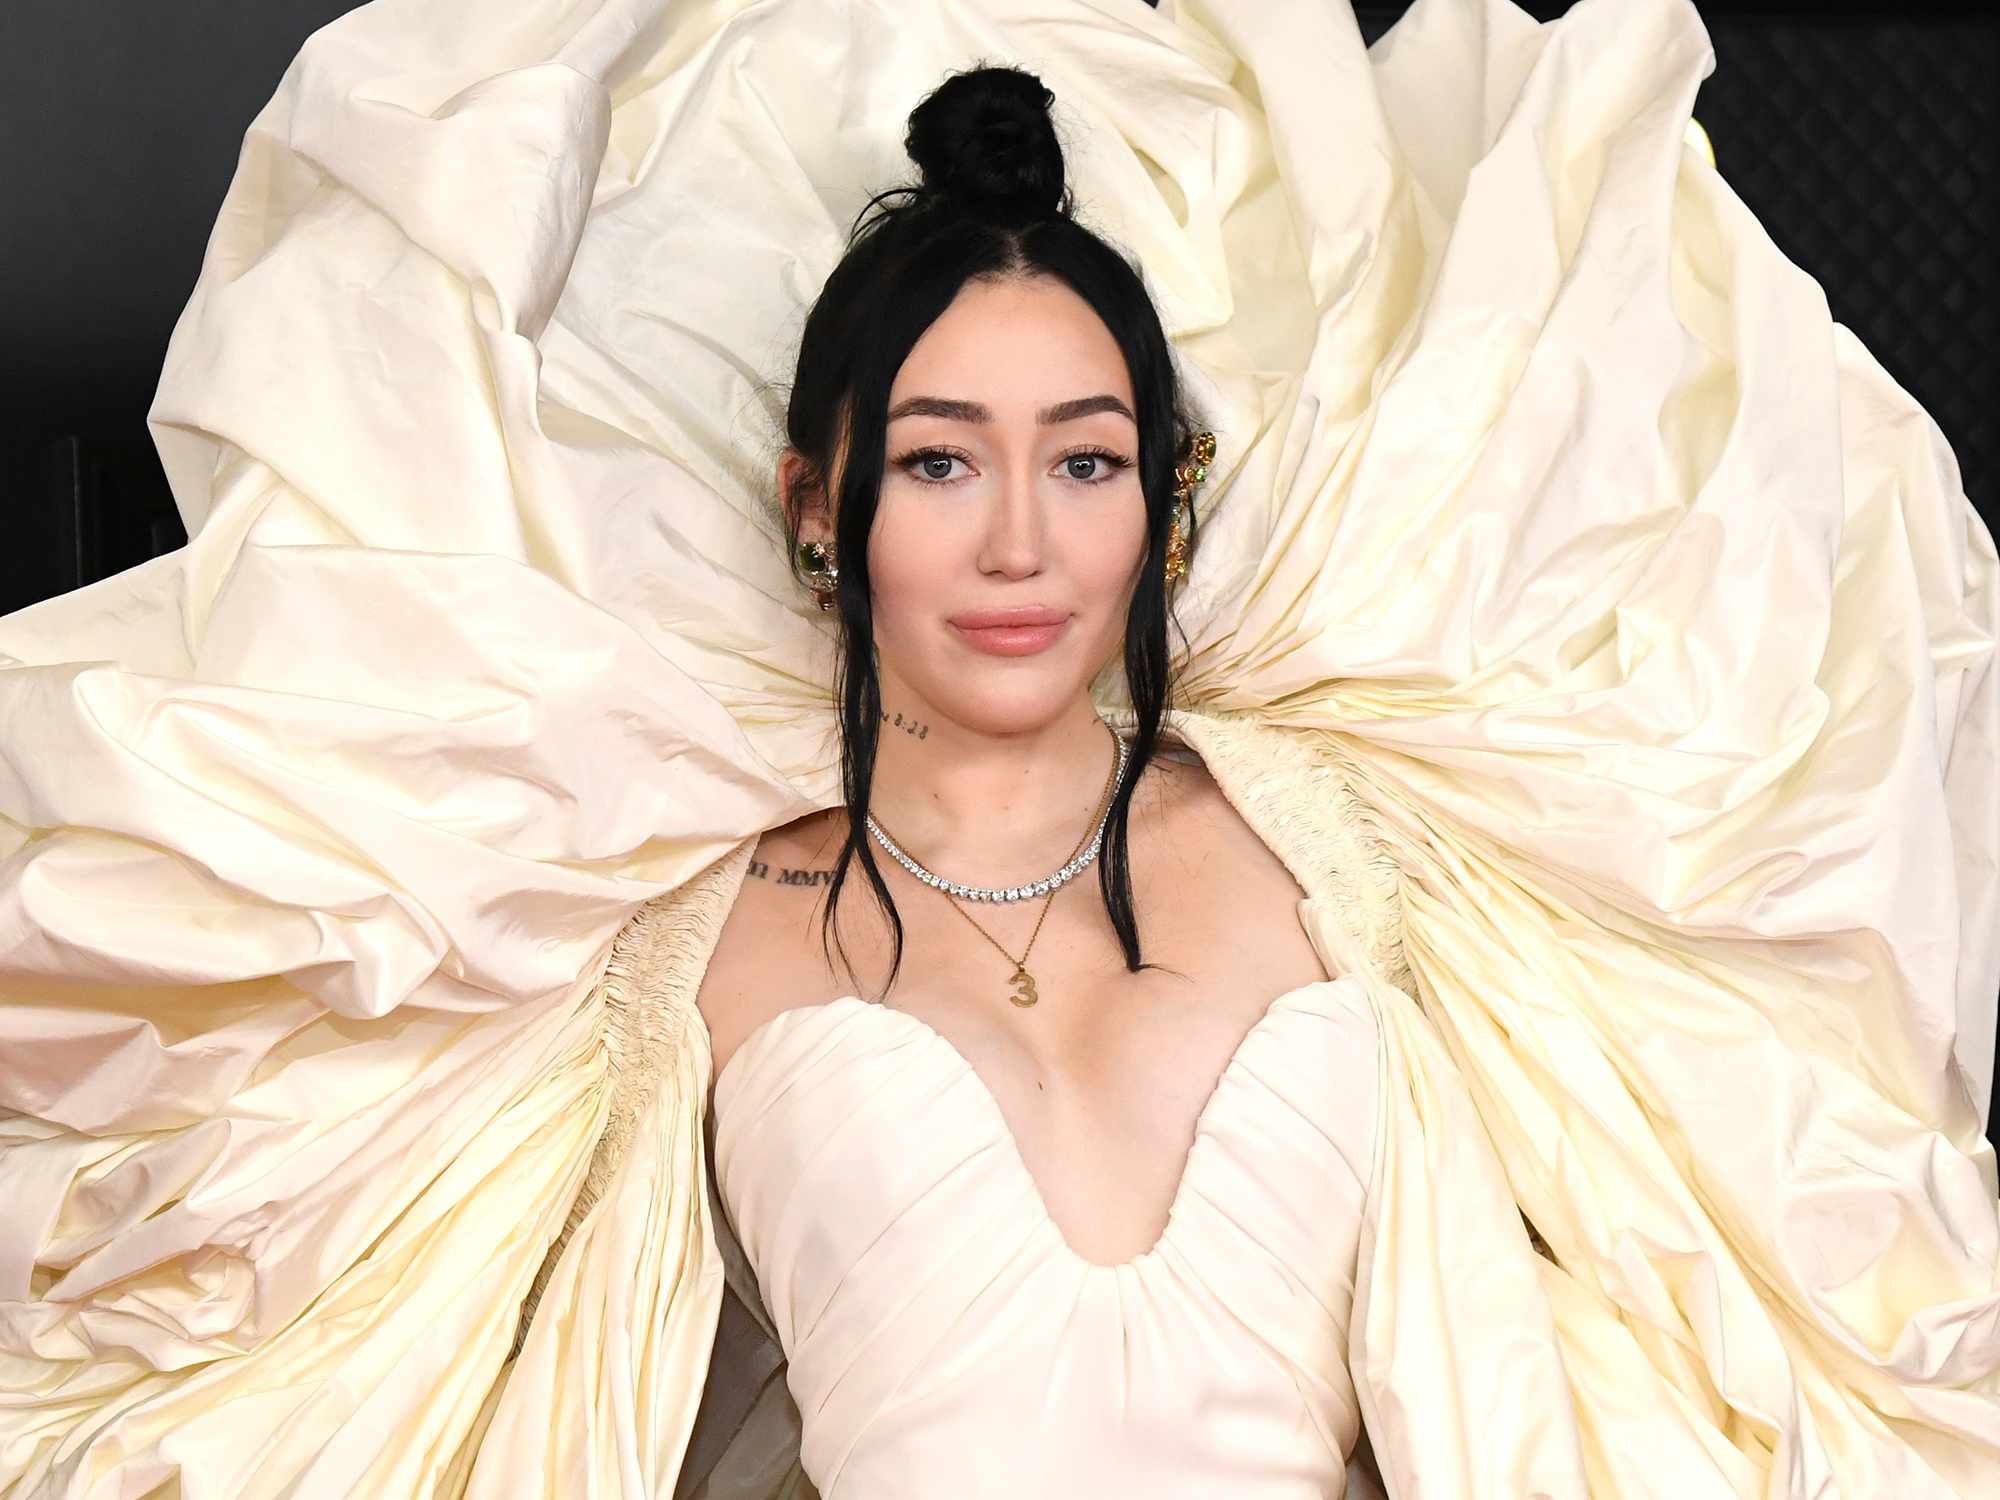 Noah Cyrus attends the 63rd Annual GRAMMY Awards at Los Angeles Convention Center on March 14, 2021 in Los Angeles, California